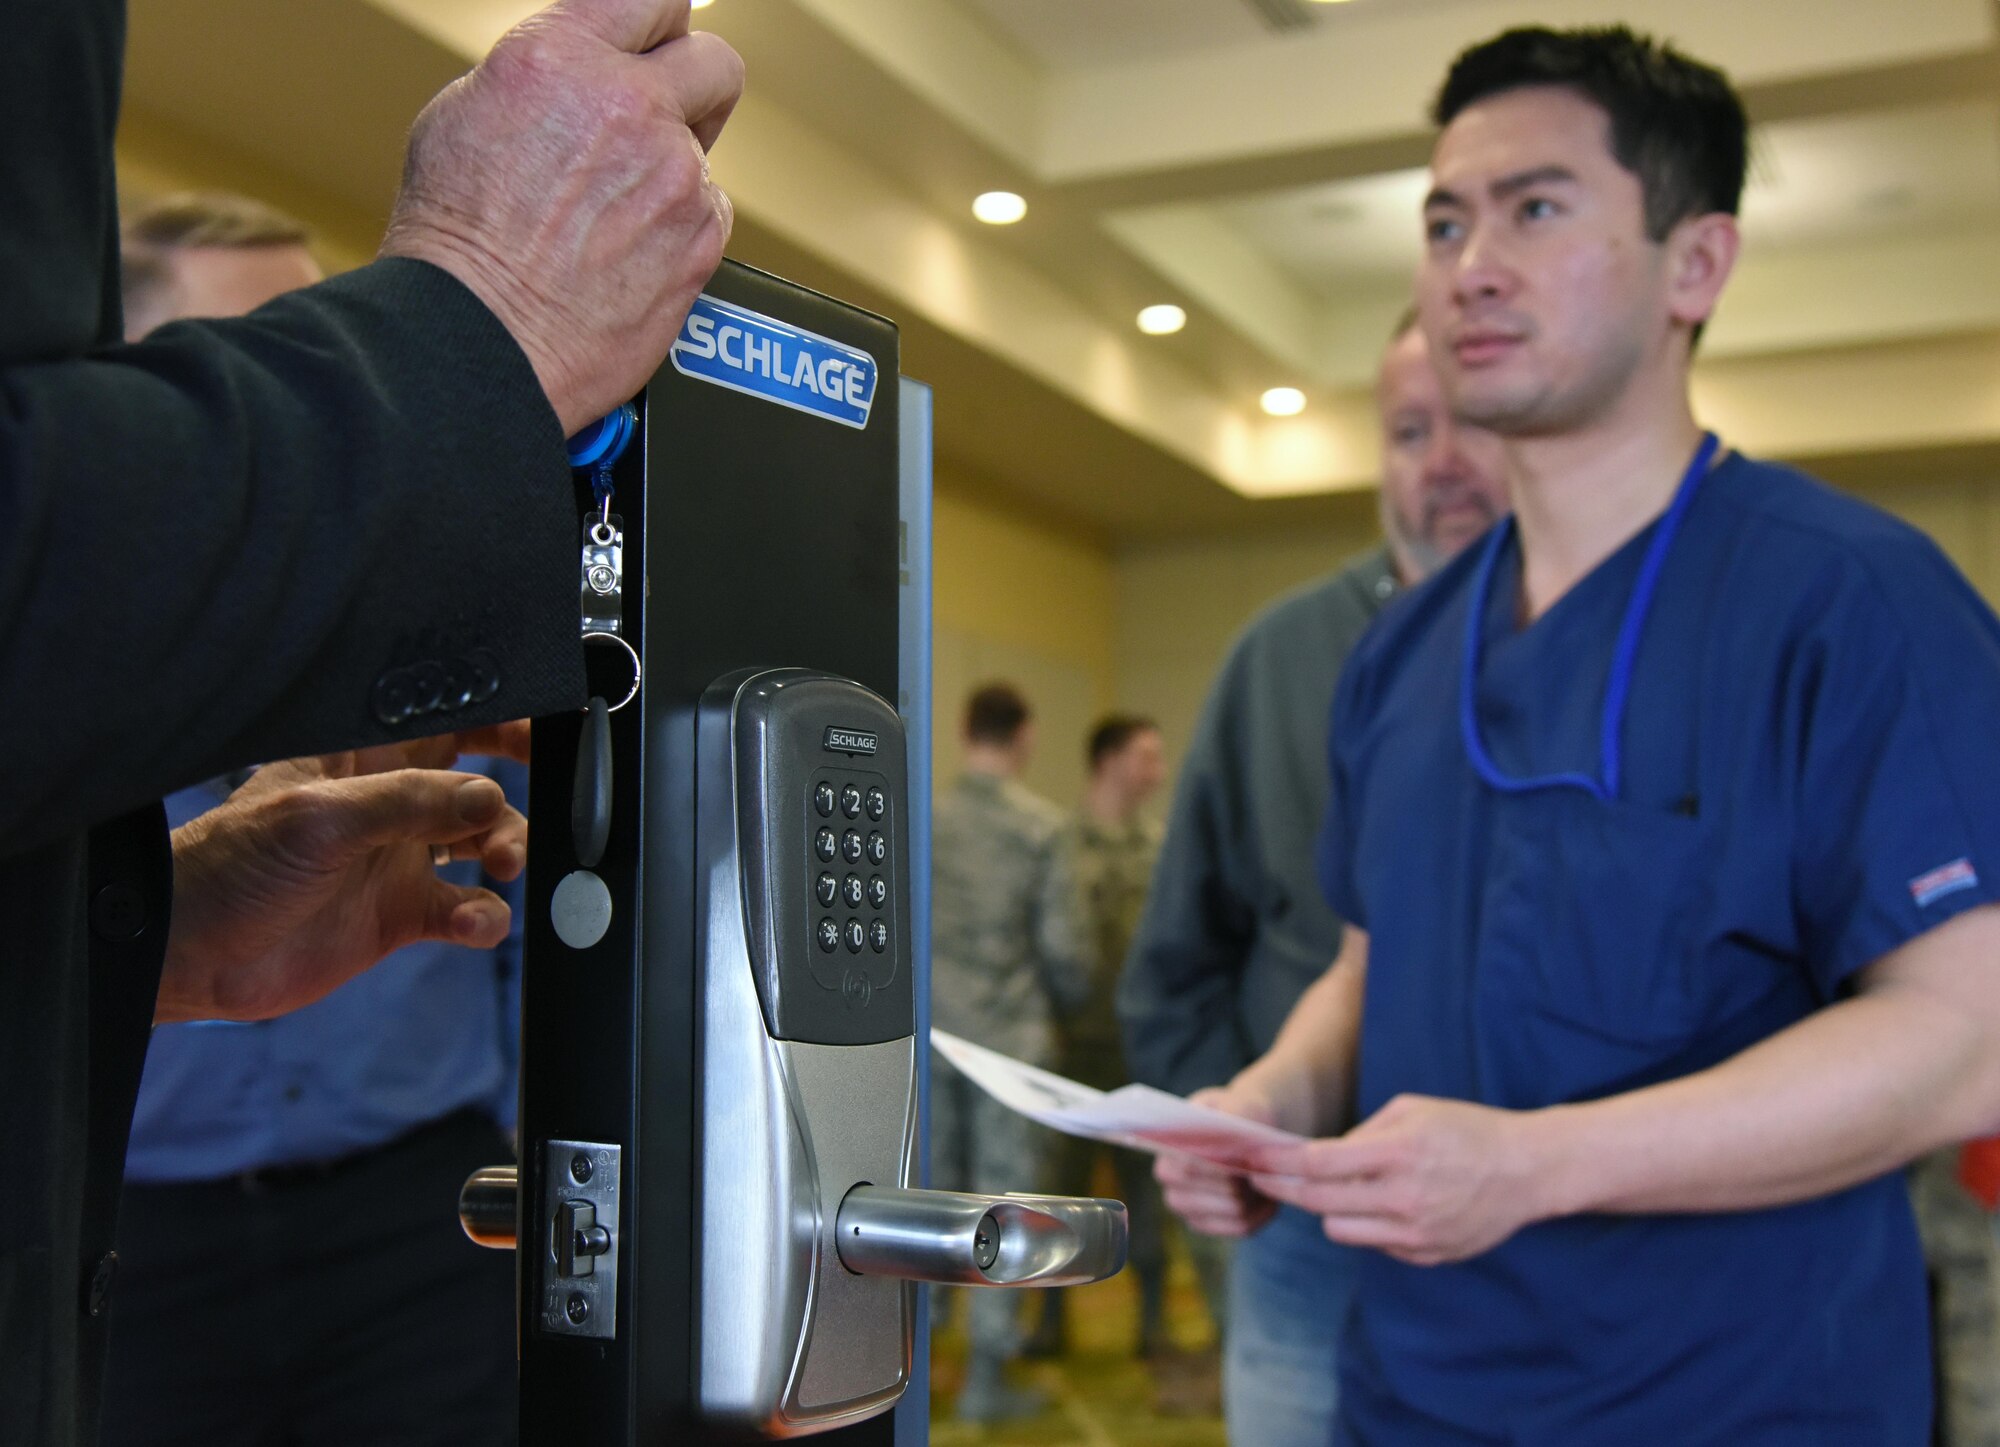 Johnny Truong, VA Hospital chiropractor, watches a demonstration on a common access card lock given by Terry Collins, Allegion government sales director, during the Annual Keesler Air Force Base Tech Expo inside the Bay Breeze Event Center at Keesler Air Force Base, Mississippi, Feb. 5, 2019. The expo was hosted by the 81st Communications Squadron and was free to all Defense Department, government and contractor personnel with base access. U.S. Air Force Maj. Jon Drummond, 81st CS commander, said events like this allows us to see the local vendors' newest technologies and find opportunities to branch that technology with Keesler's training mission. The event was held to introduce military members to the latest in technological advancements to bolster the Air Force's capabilities in national defense. (U.S. Air Force photo by Kemberly Groue)